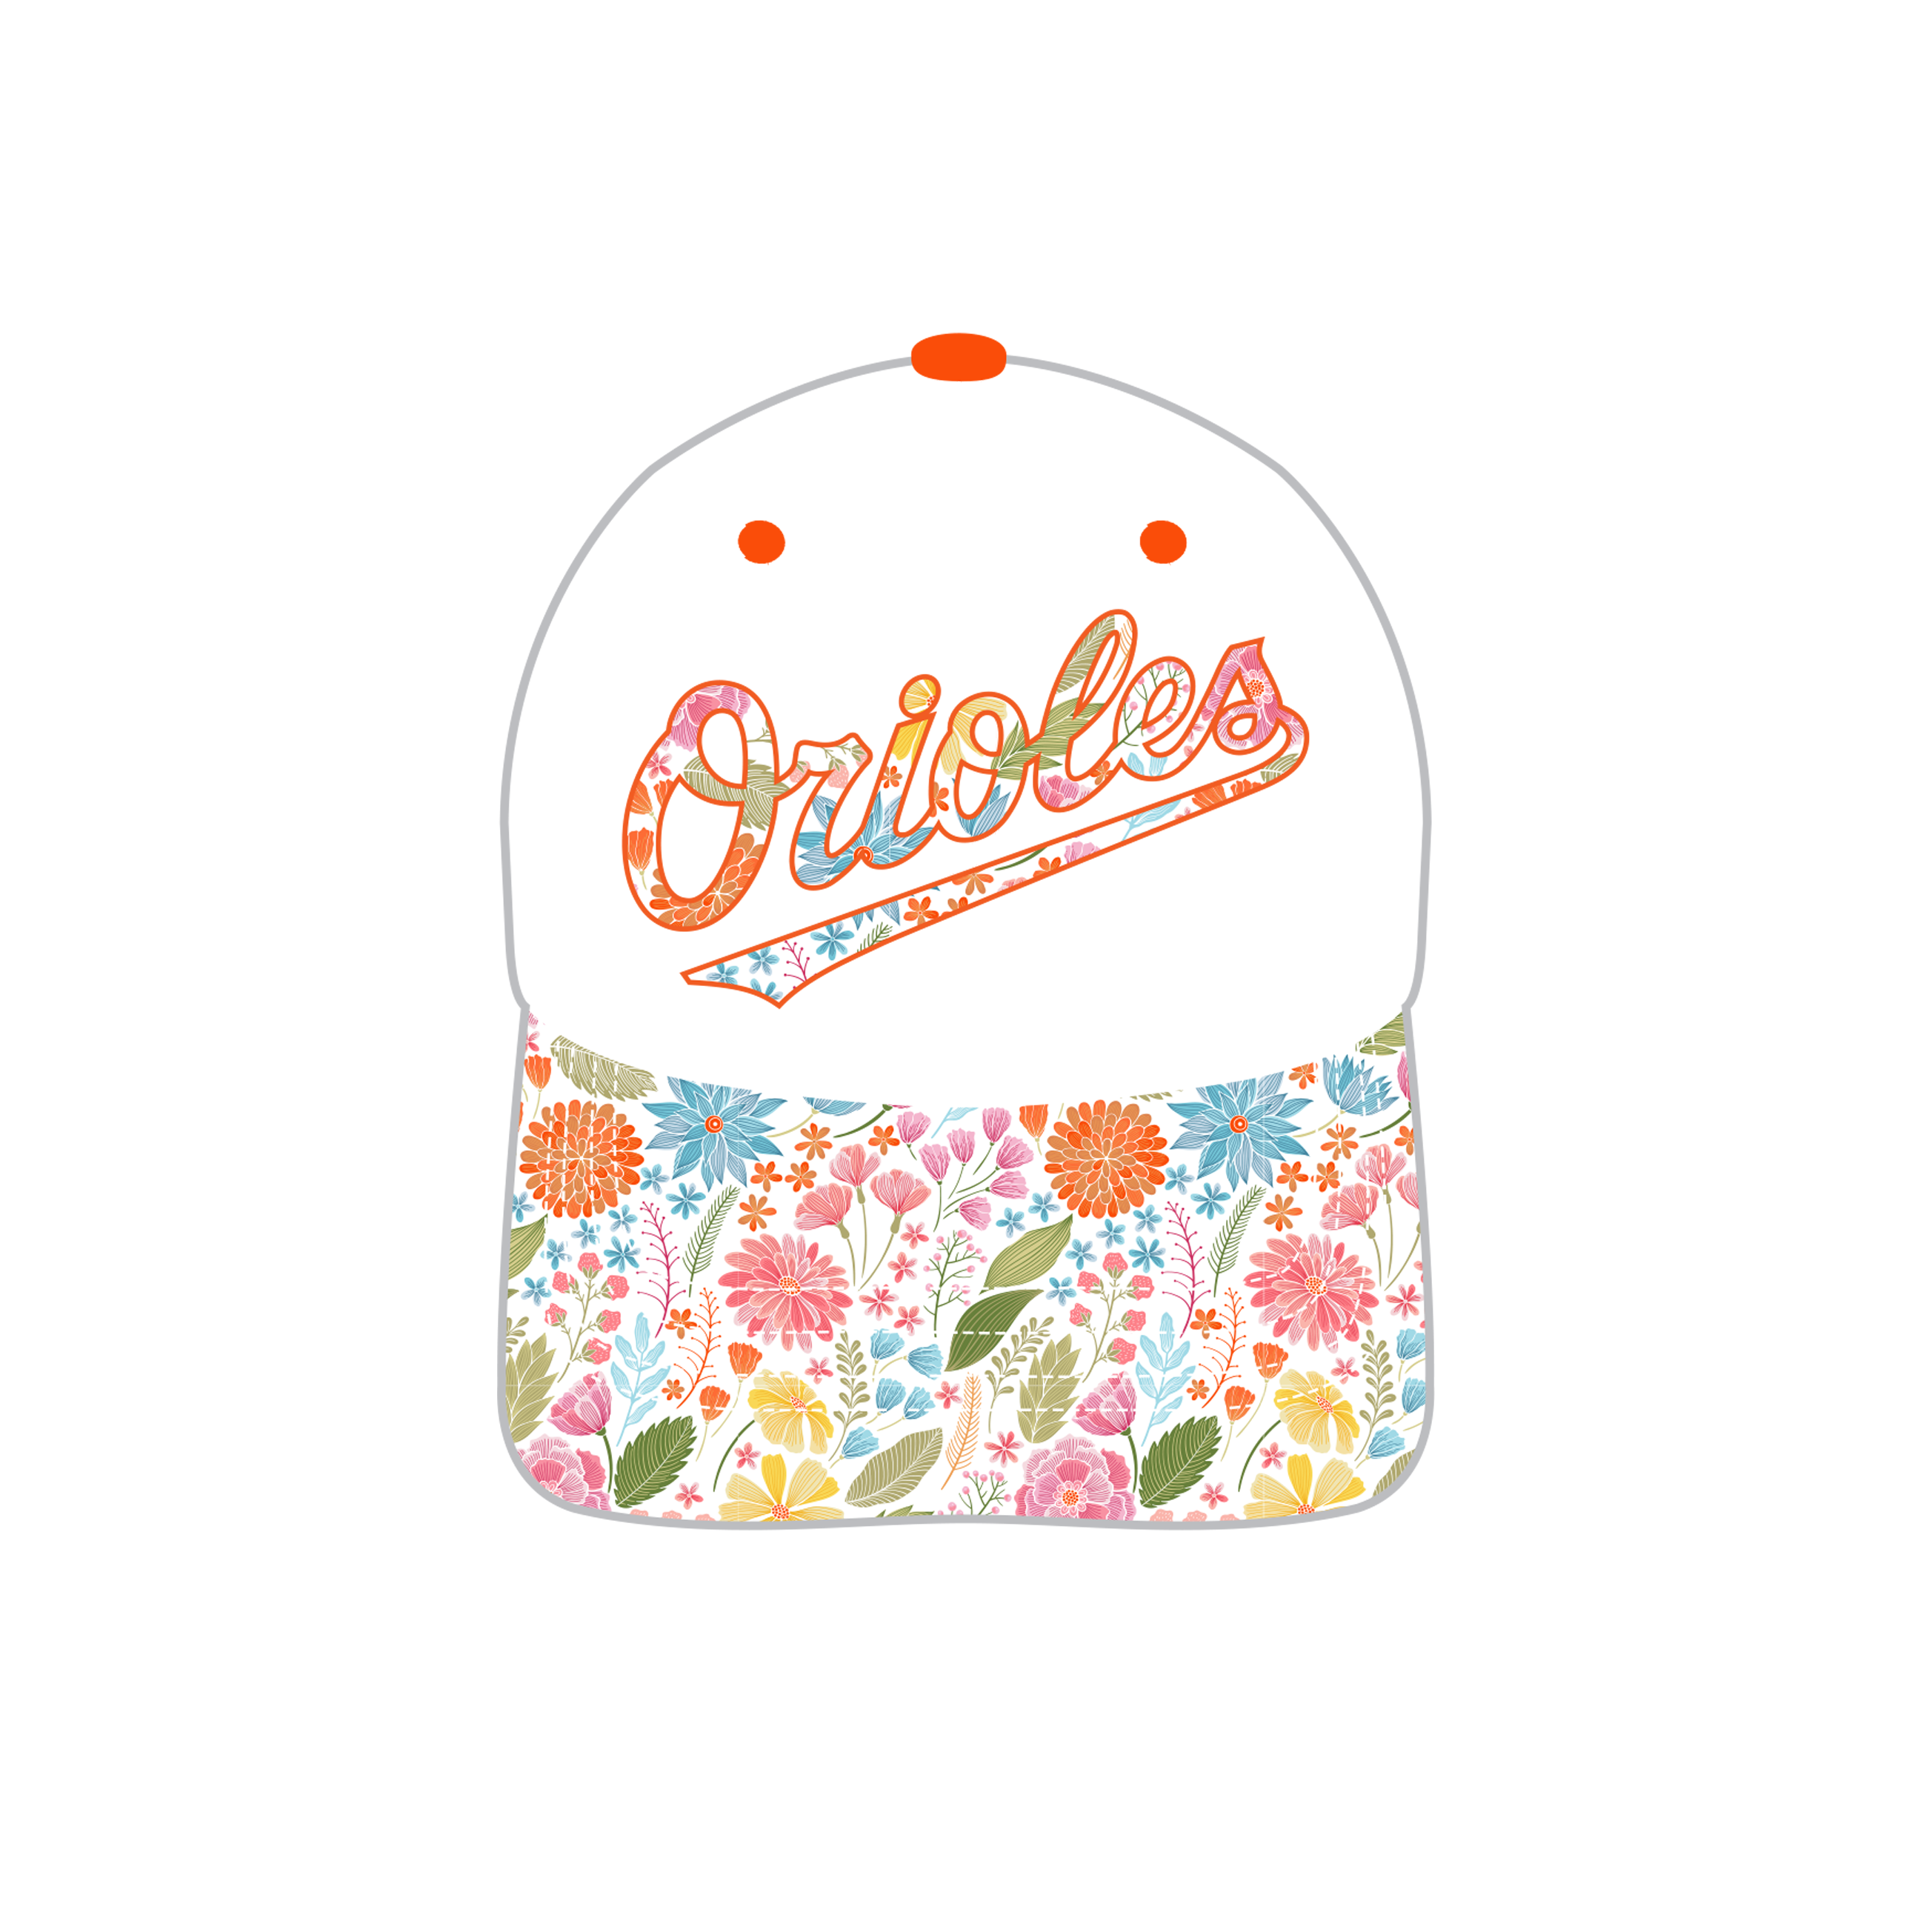 Orioles Announce 2018 Promotions and Giveaways